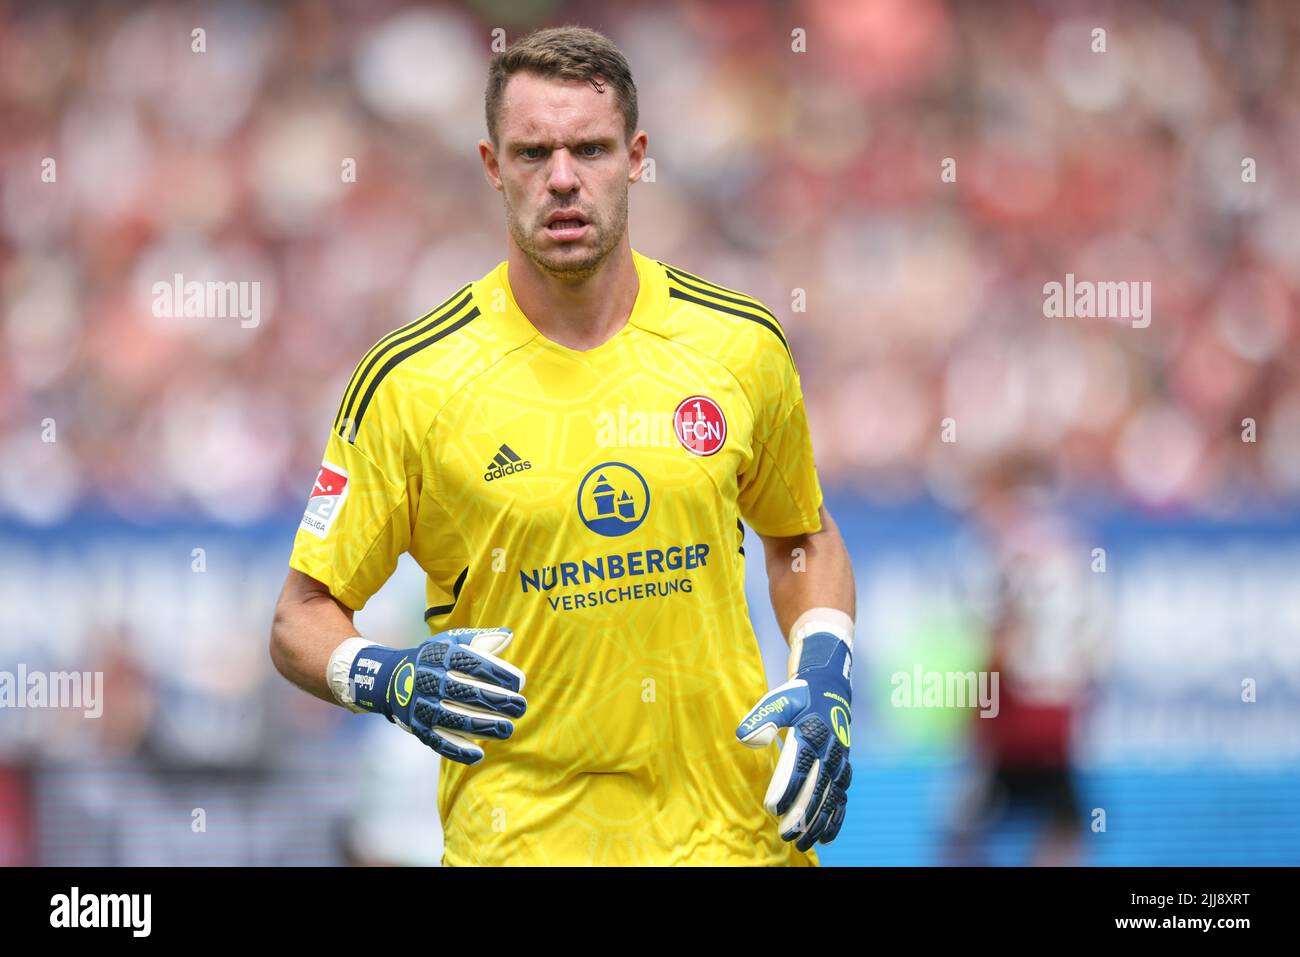 23 July 2022, Bavaria, Nuremberg: Soccer: 2nd Bundesliga, 1. FC Nuremberg - SpVgg Greuther Fürth, 2nd matchday at Max Morlock Stadium. Nuremberg goalkeeper Christian Mathenia. Photo: Daniel Karmann/dpa - IMPORTANT NOTE: In accordance with the requirements of the DFL Deutsche Fußball Liga and the DFB Deutscher Fußball-Bund, it is prohibited to use or have used photographs taken in the stadium and/or of the match in the form of sequence pictures and/or video-like photo series. Stock Photo